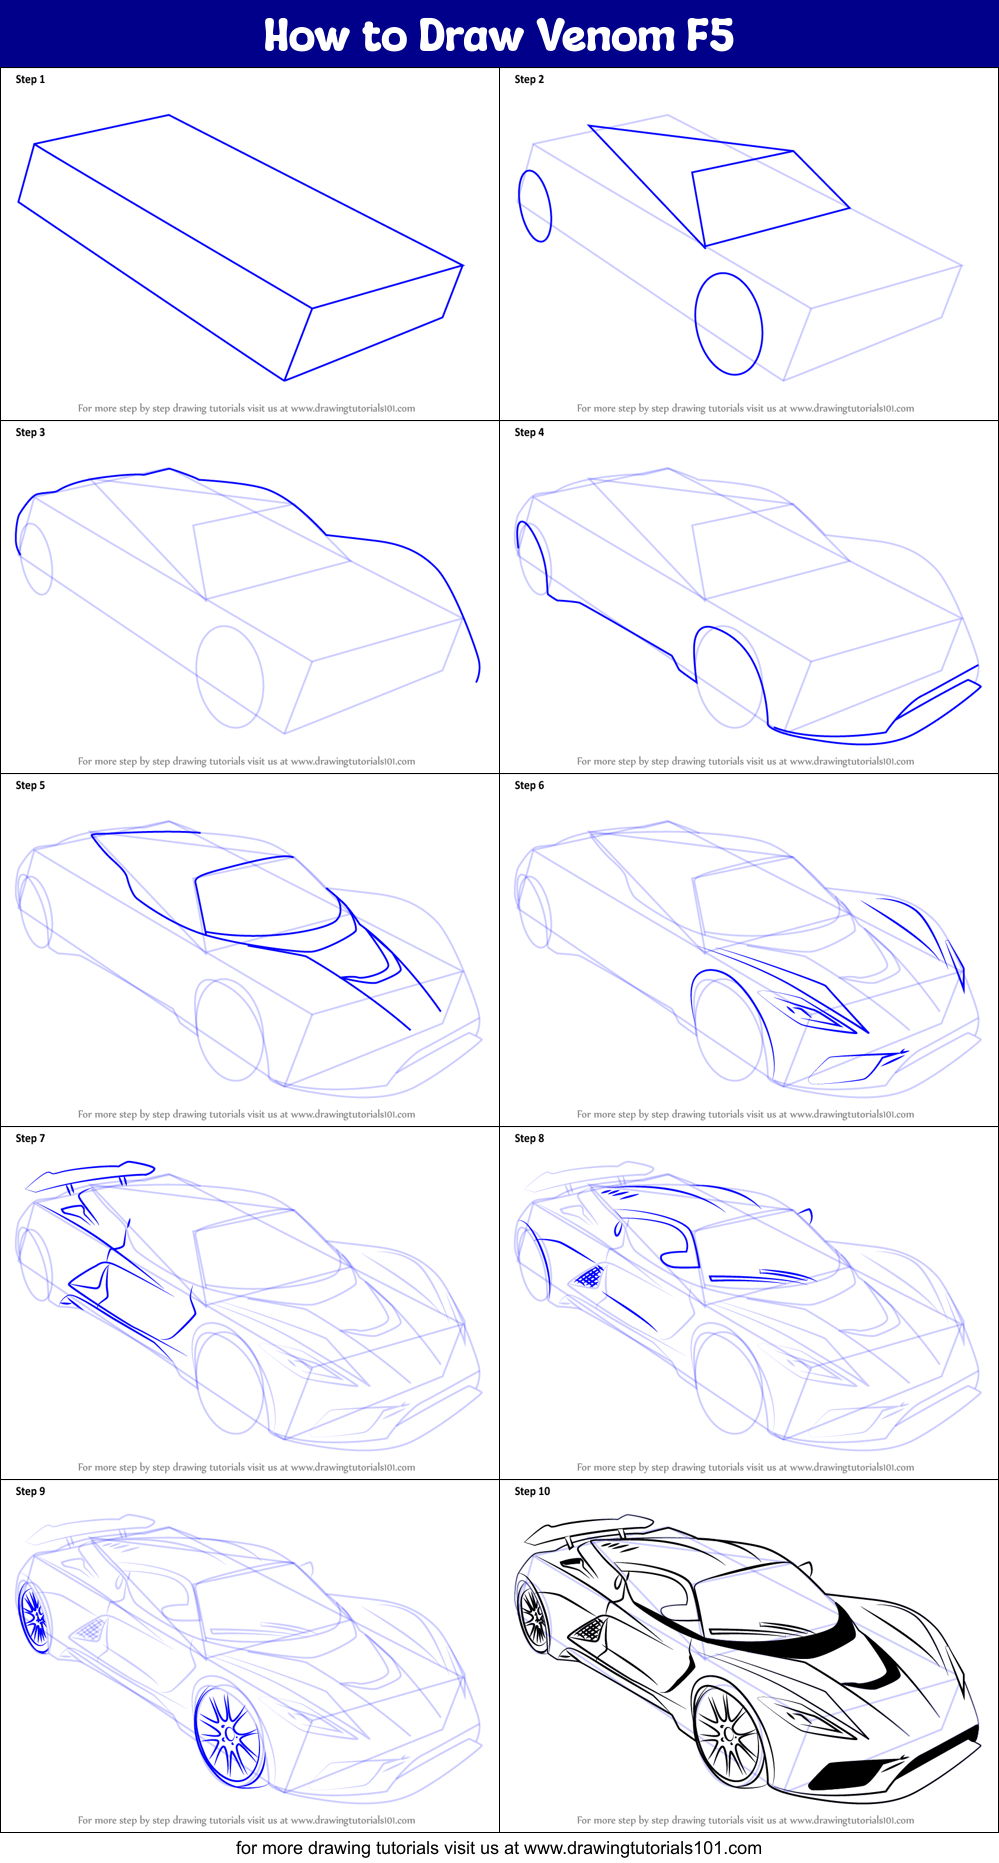 How to Draw Venom F5 printable step by step drawing sheet